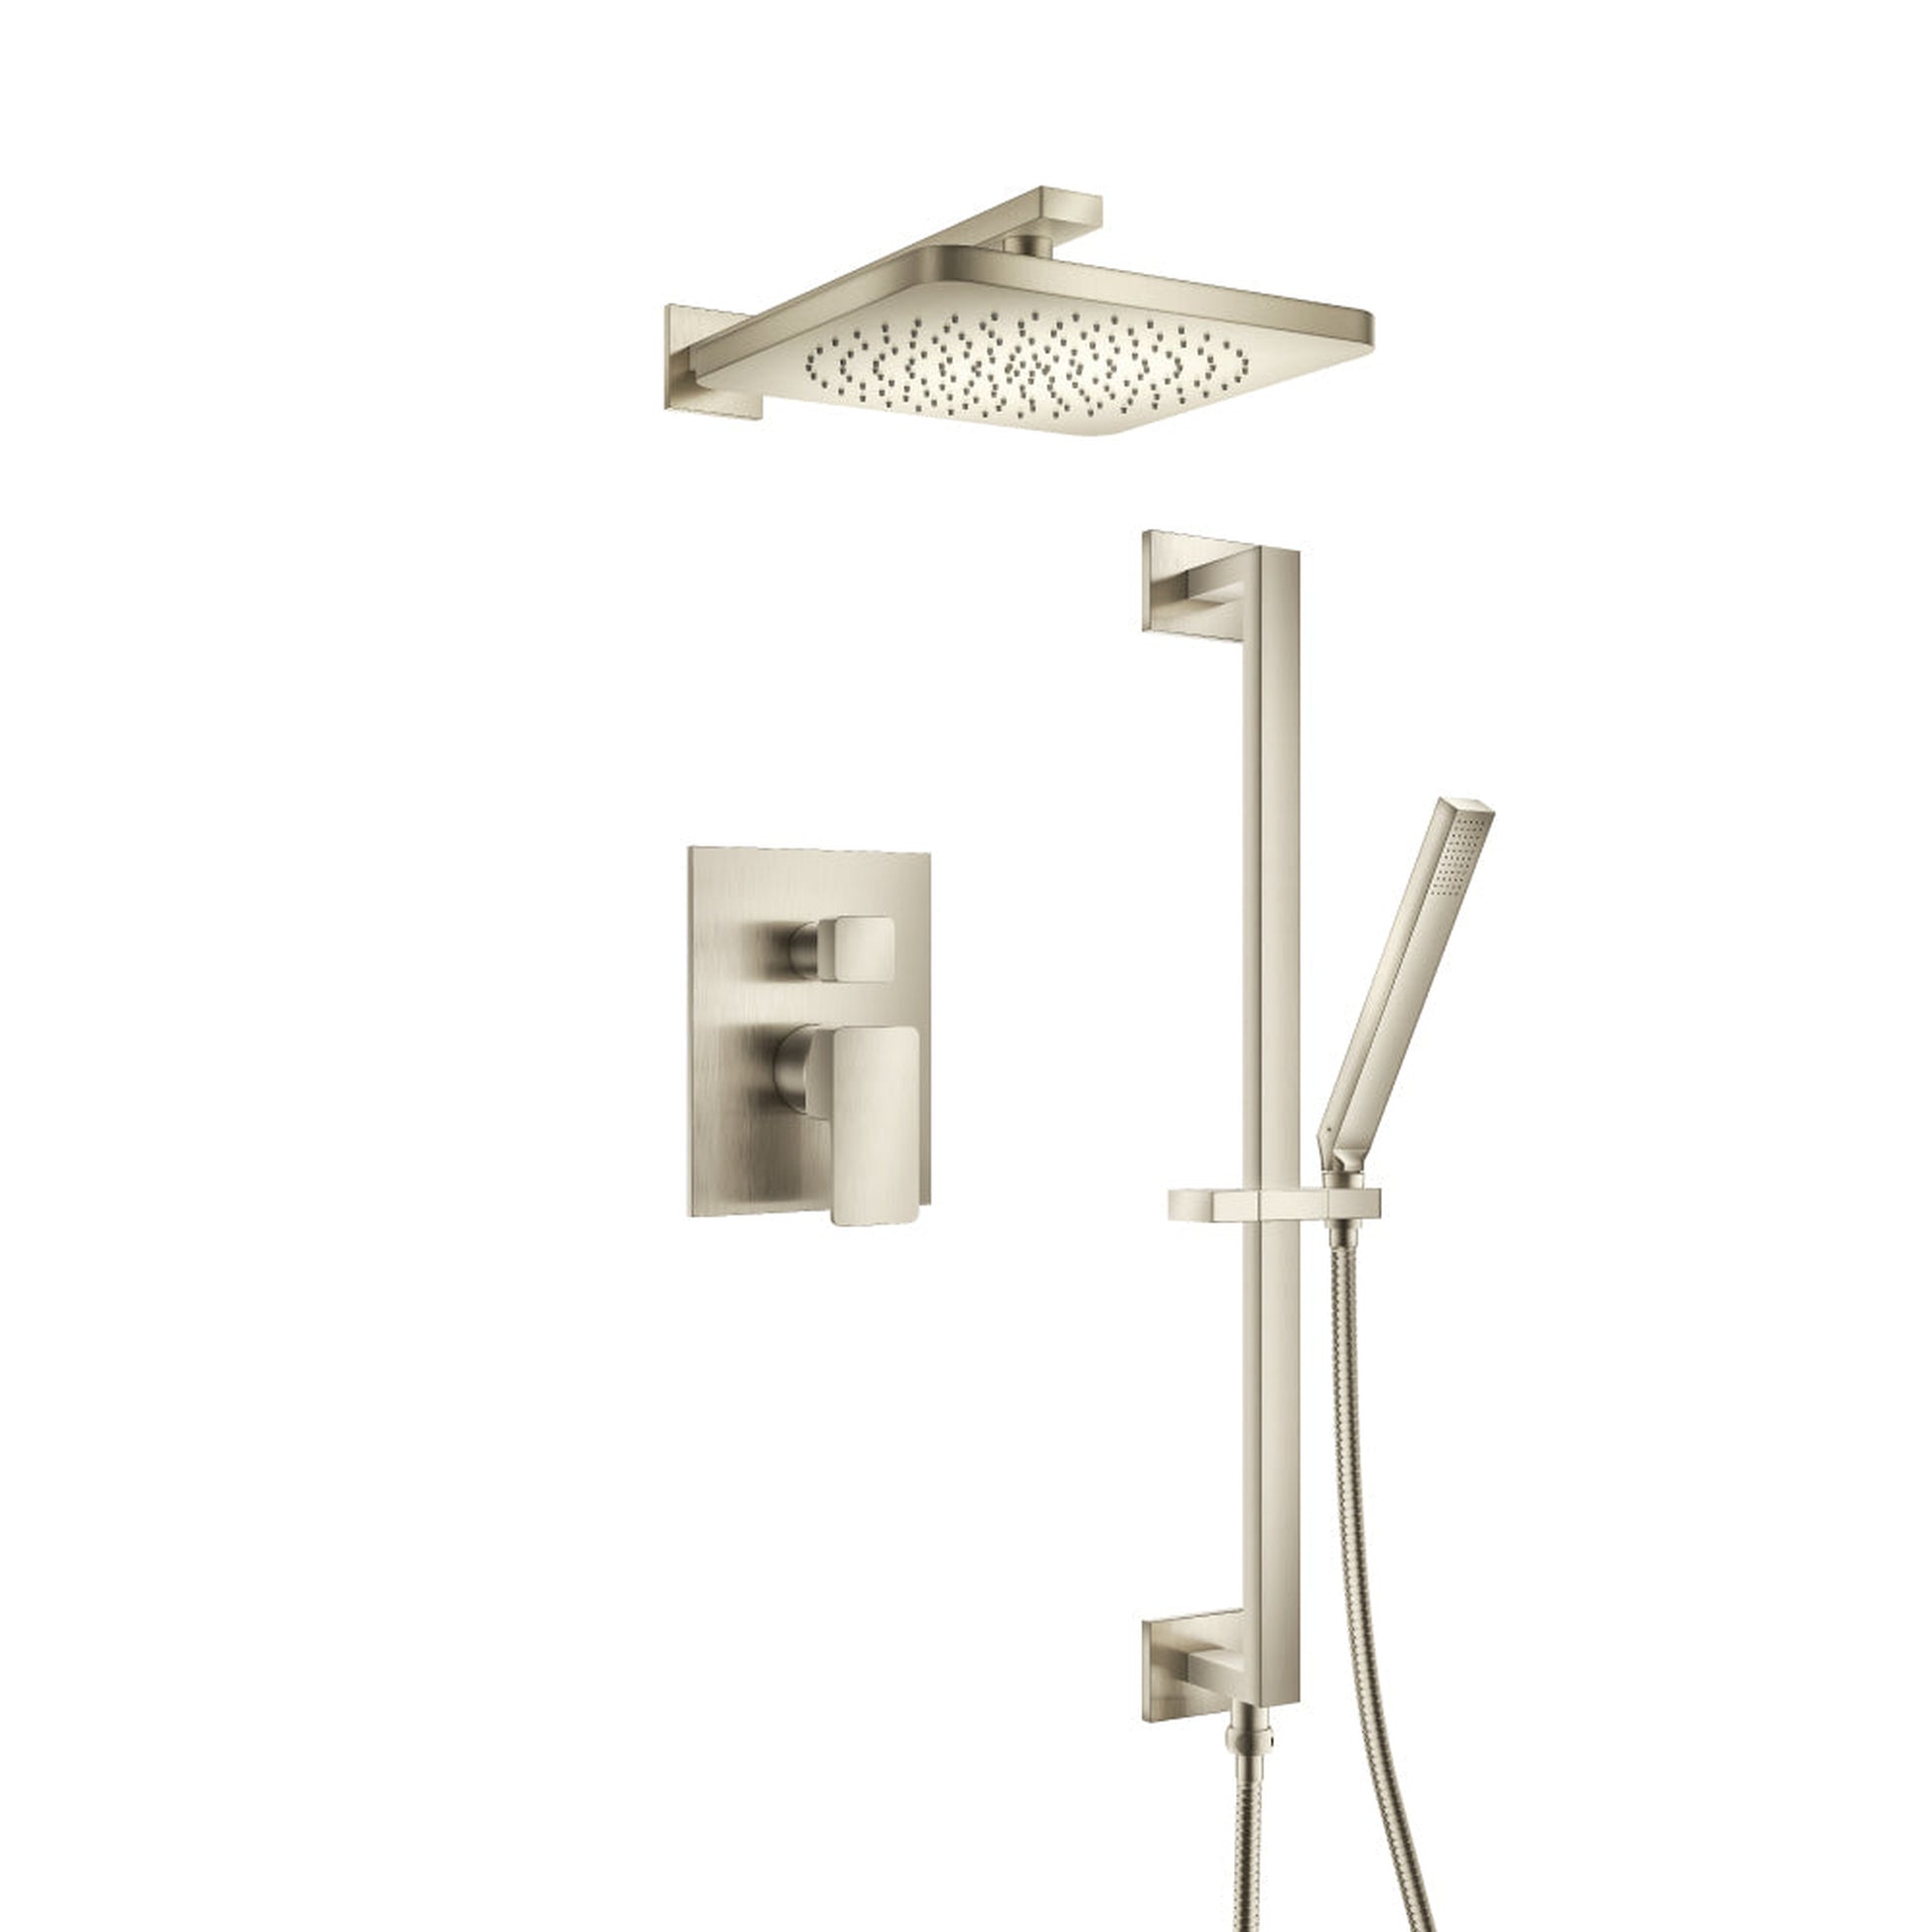 Isenberg Serie 196 Two Output Shower Set With Shower Head, Hand Held and Slide Bar in Brushed Nickel (196.3450BN)